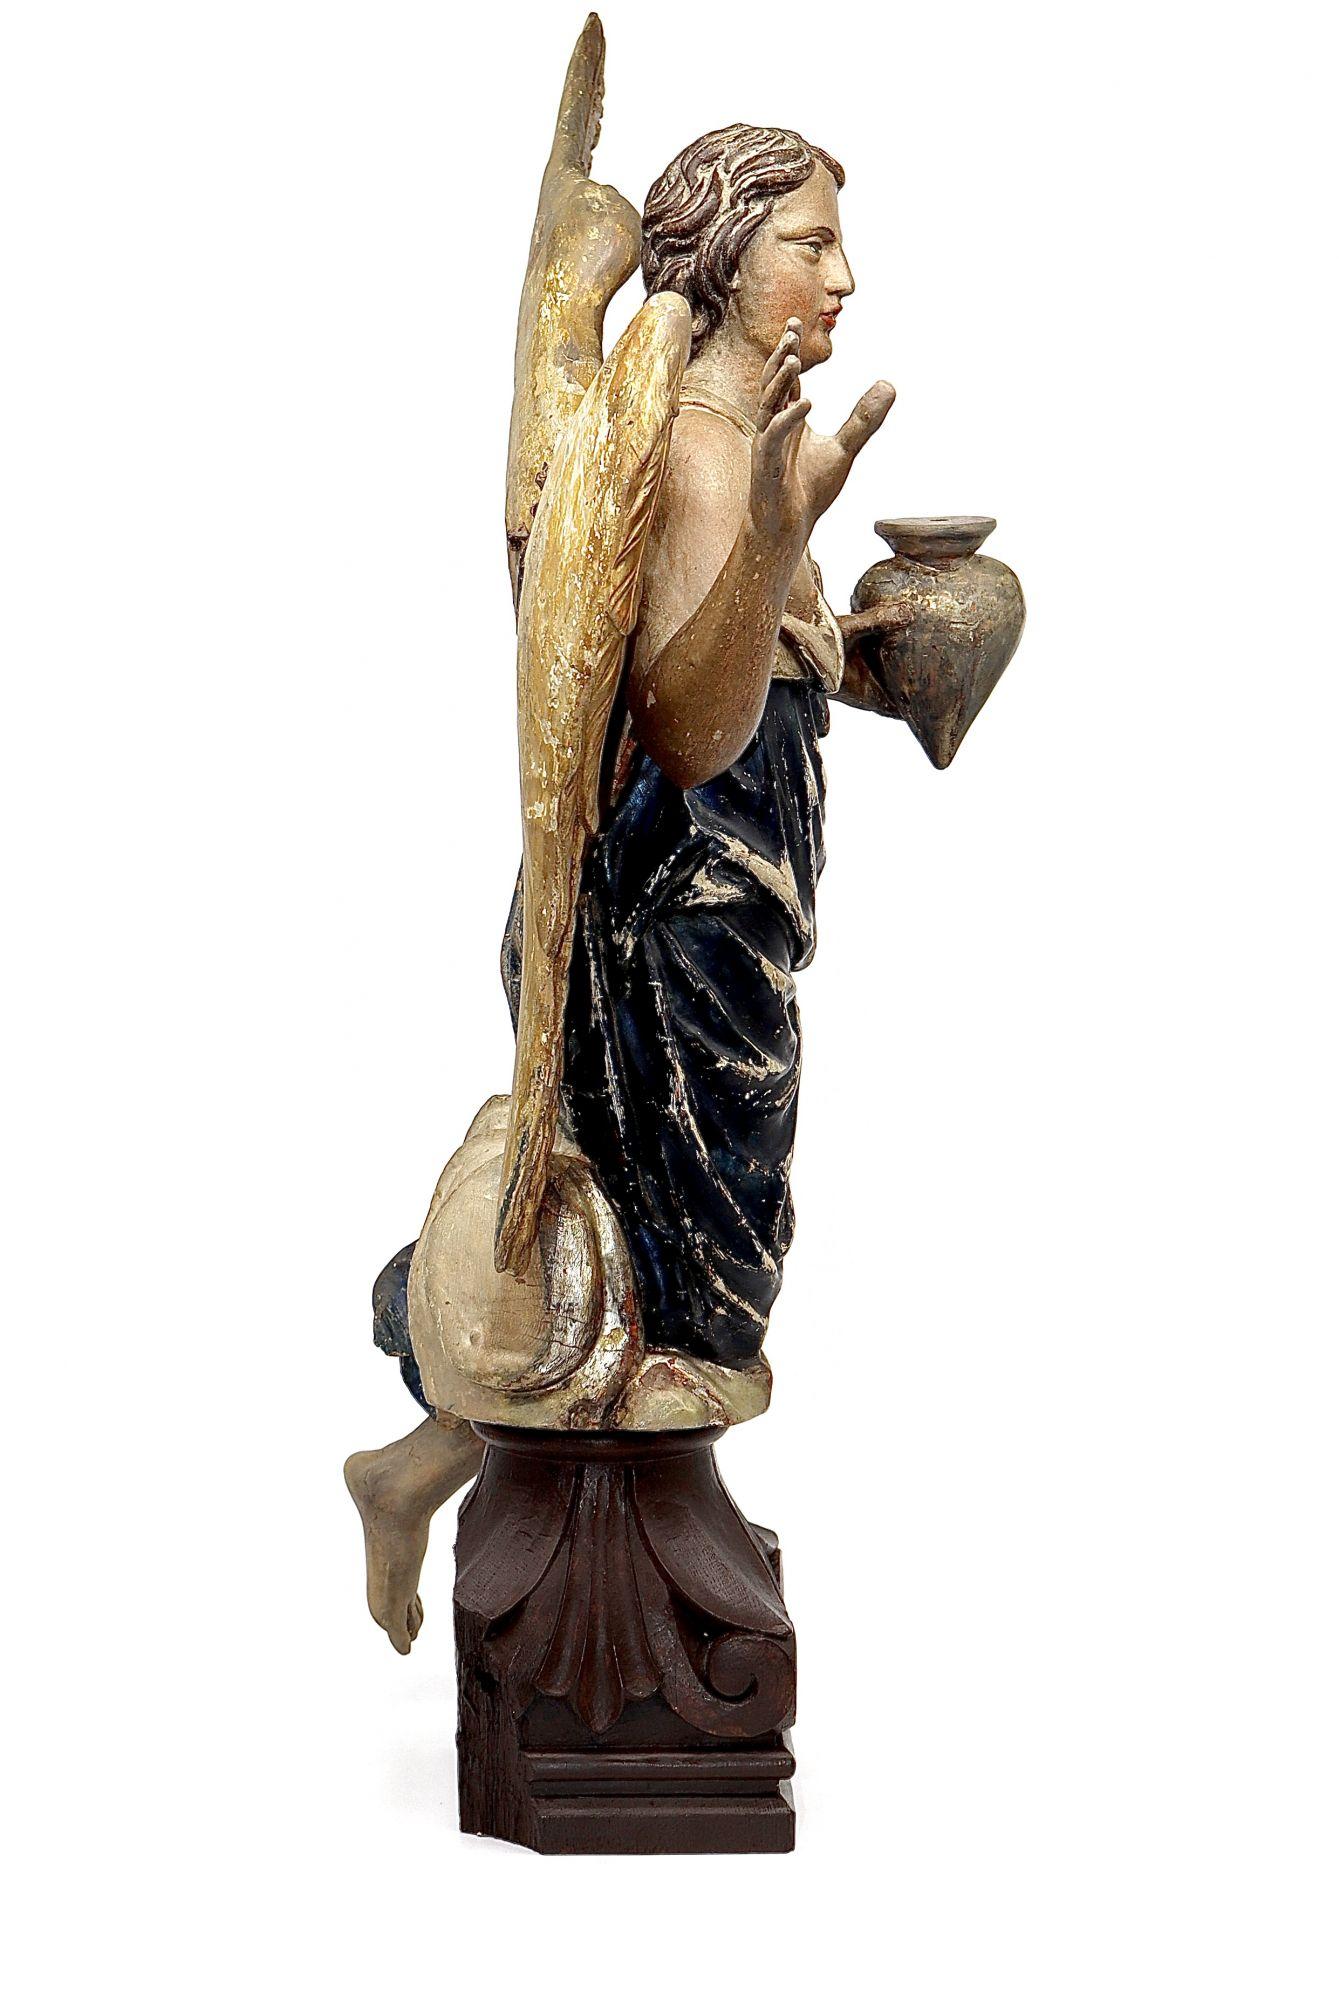 German Extremely Fine Northern European Carved Wood and Polychrome Decorated Figure